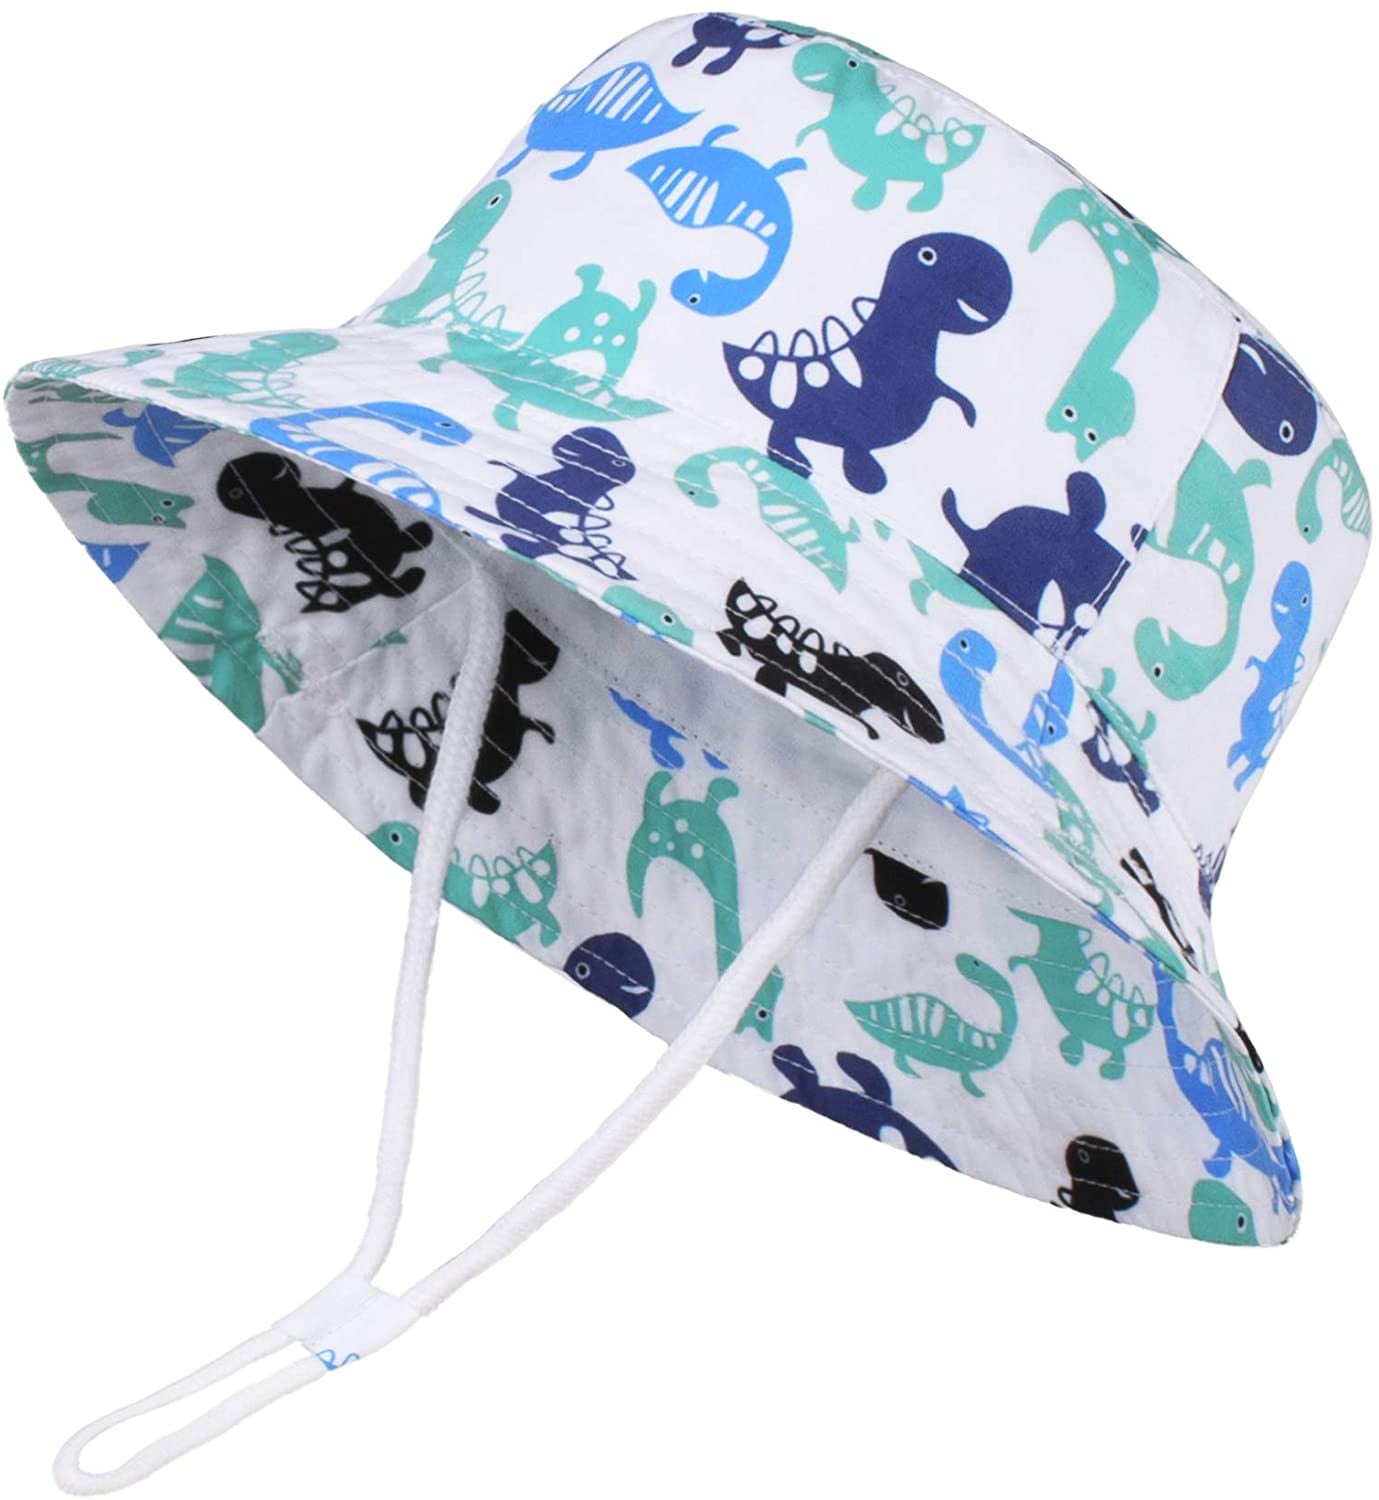 LANGZHEN Sun Protection Hat for Kids Toddler Boys Girls Wide Brim Summer Play Hat Cotton Baby Bucket Hat with Chin Strap 